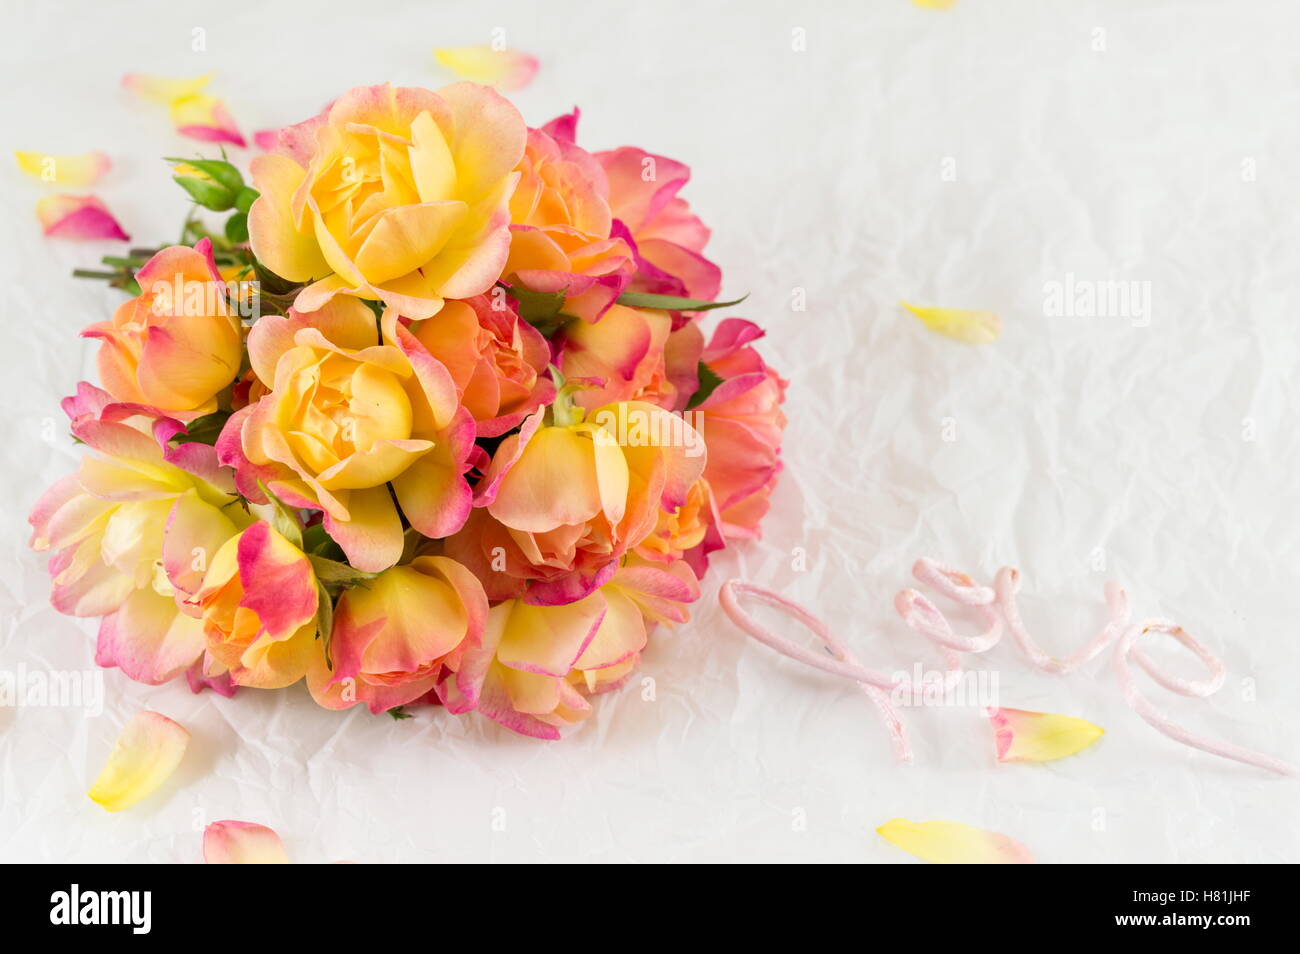 Red and yellow fresh roses on white background Stock Photo